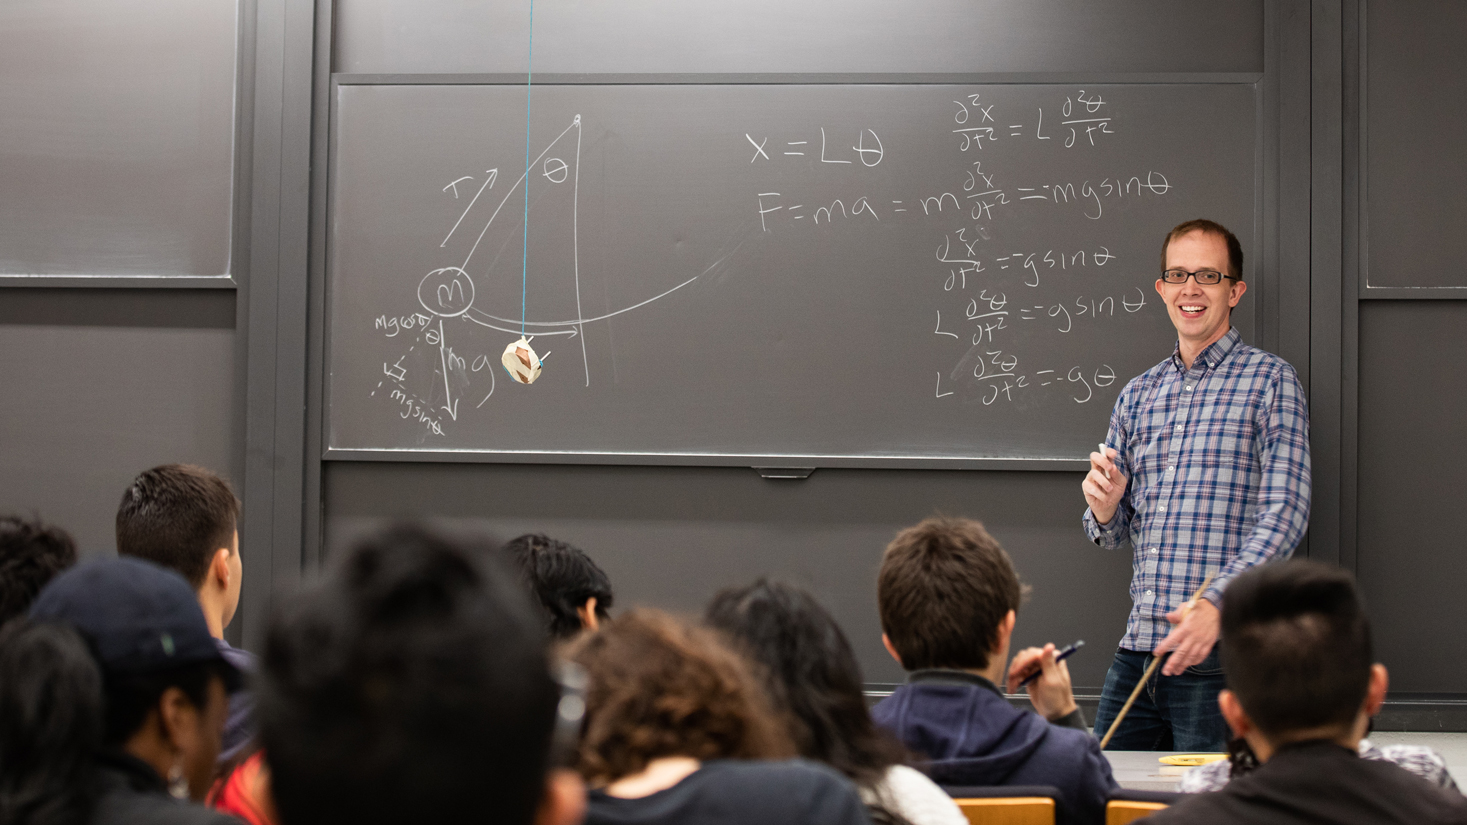 Professor Andrew Houck gives a calculus lecture